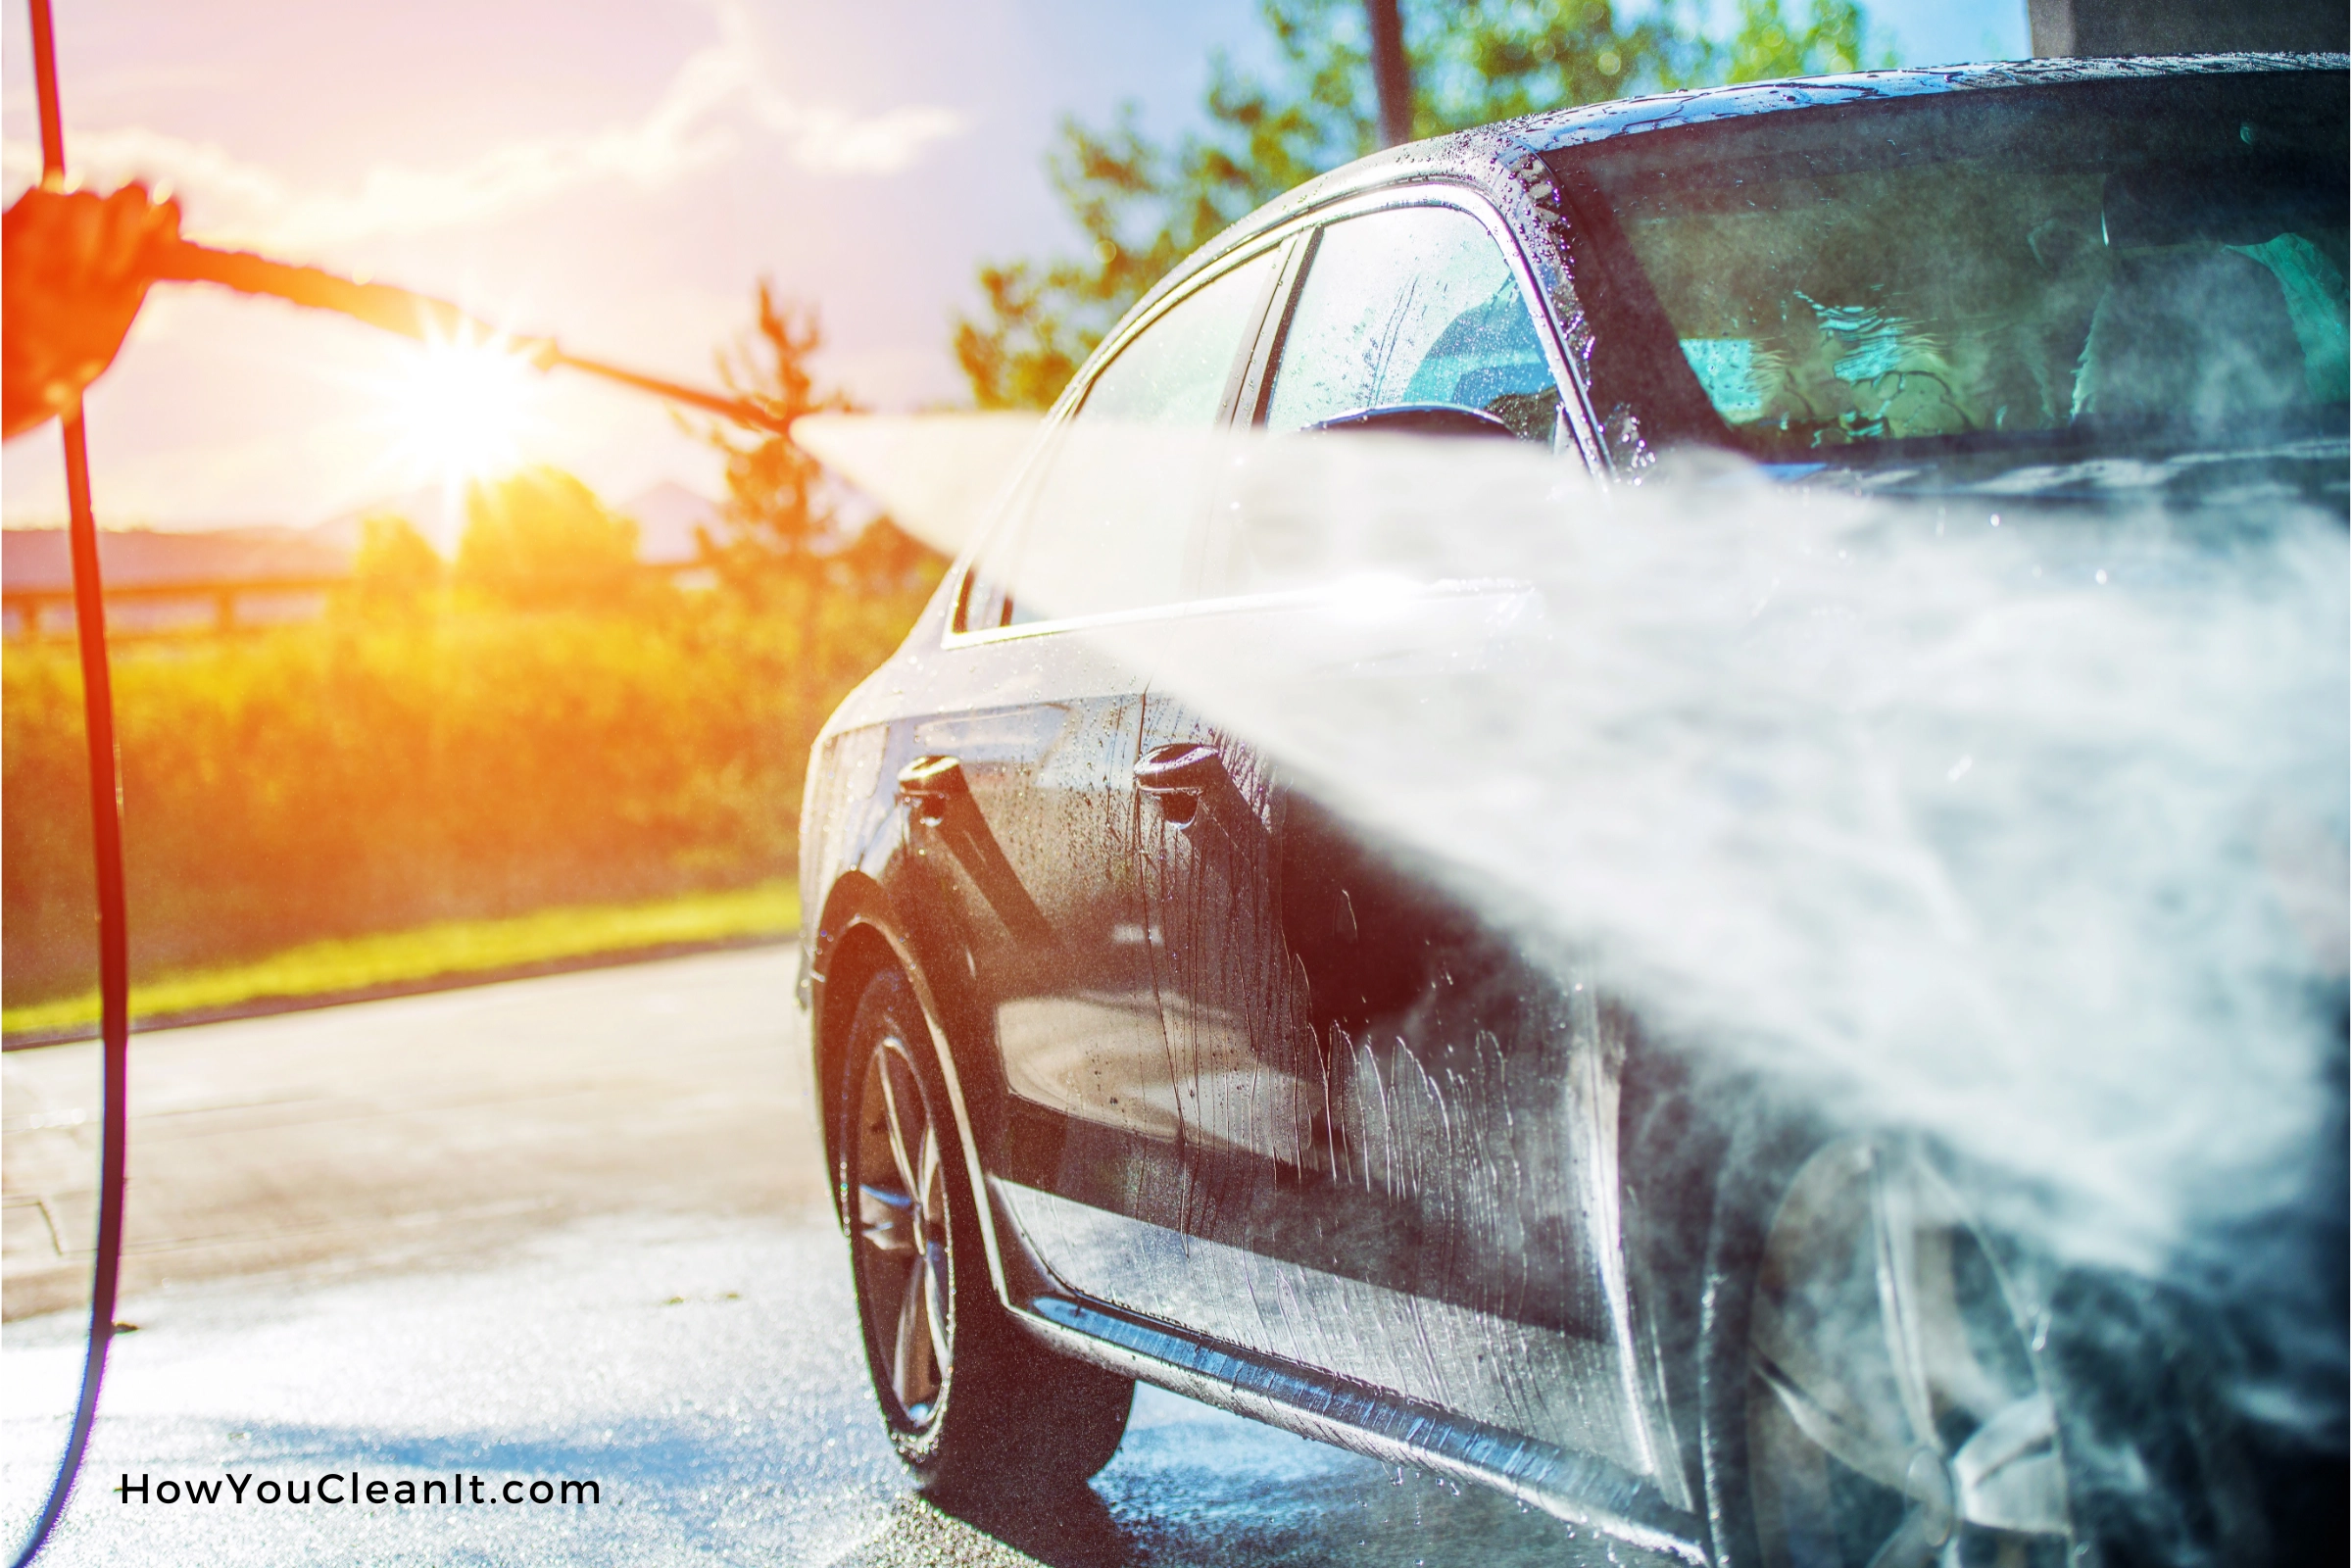 how to remove mold from car exterior
